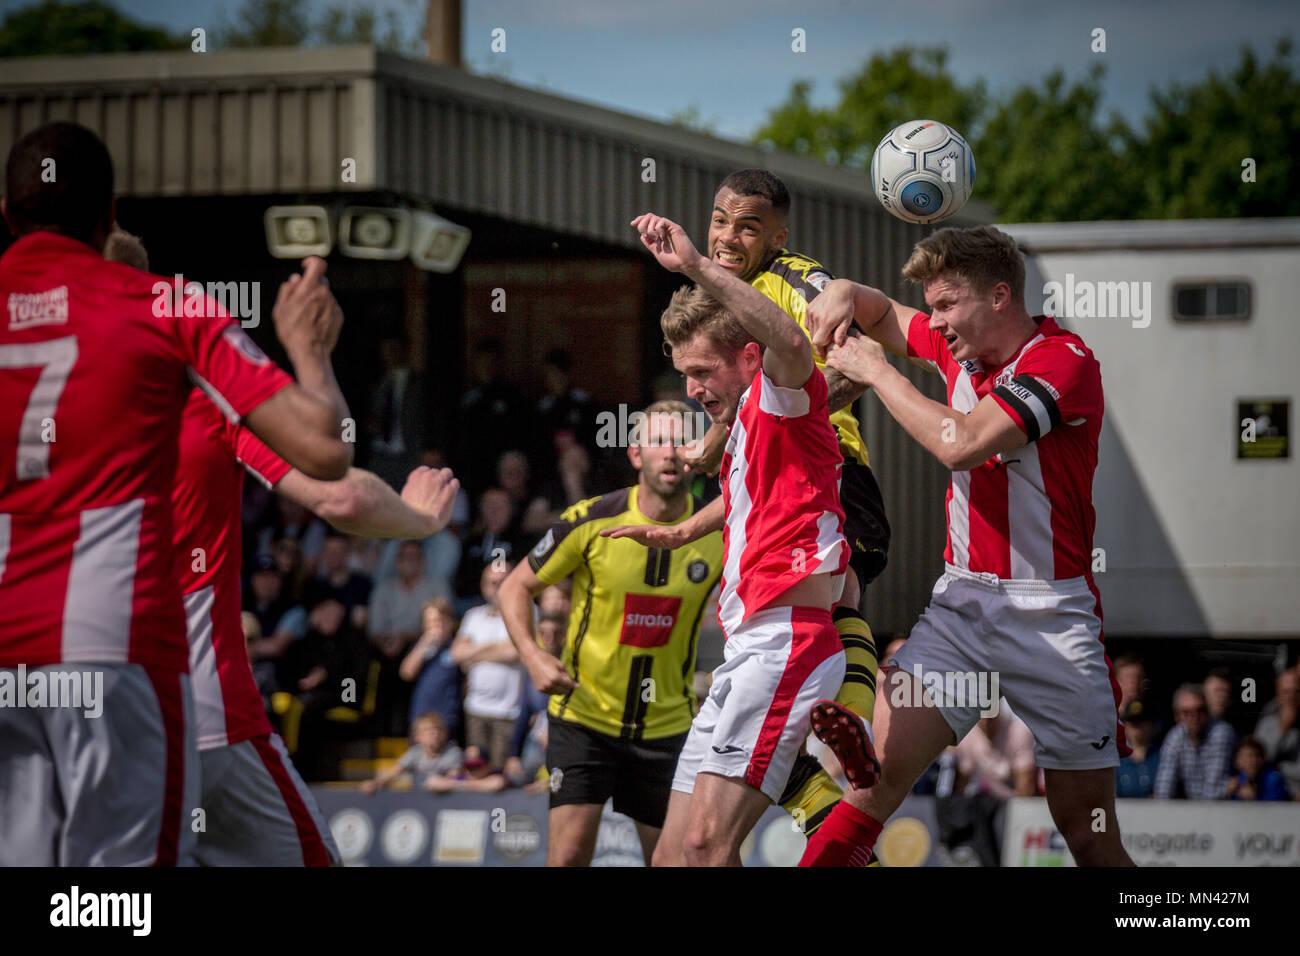 Harrogate, Yorkshire, UK. 13th May, 2018. News: Harrogate Town Promoted to the National League, The CNG Stadium, Harrogate North Yorkshire, UK. 13 May 2018.   Warren Burrell (Harrogate Town) gets a header towards goal while under pressure from the Brackley Town defenders.  Gareth Dean (Brackley Town) captain fails to get to the ball crossed from a corner.  Harrogate Town 3-0 Brackley Town - National League North playoff final at the CNG Stadium in Harrogate. Harrogate are promoted to the National League for the 2018/19 season. Credit: Caught Light Photography Limited/Alamy Live News Stock Photo